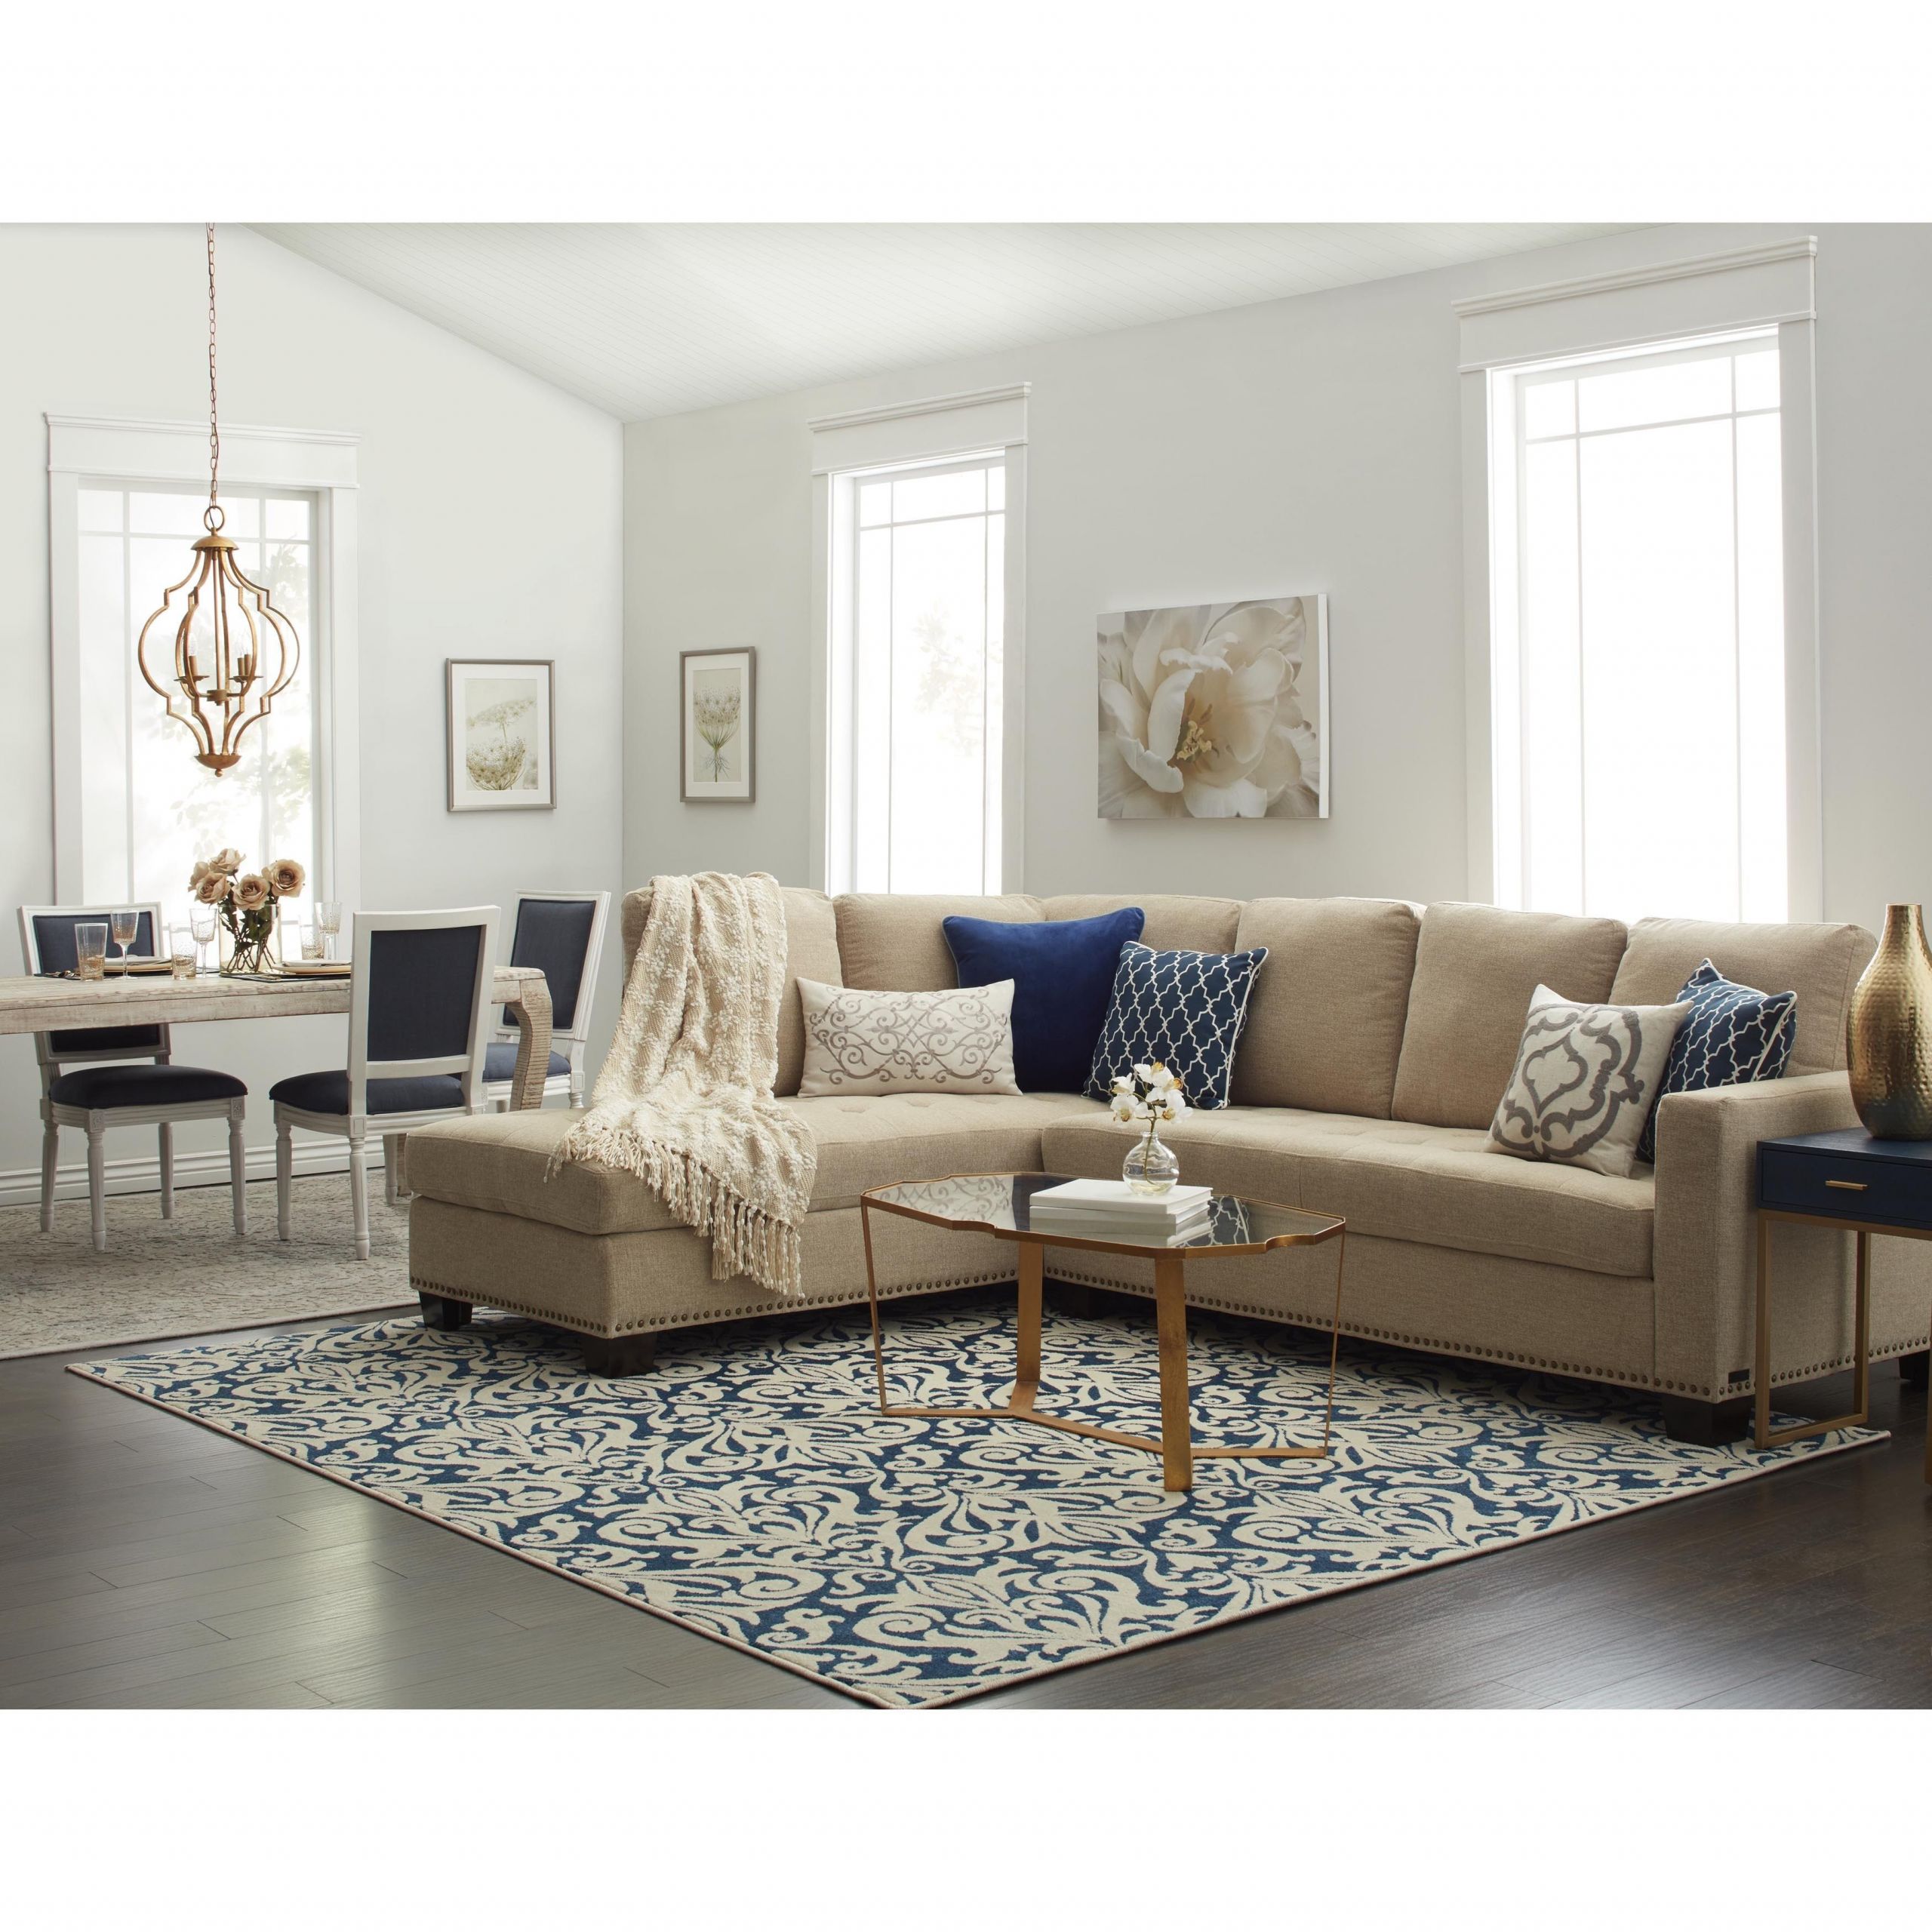 Beige Couch Living Room Ideas
 Abbyson Claridge Fabric Sectional in 2019